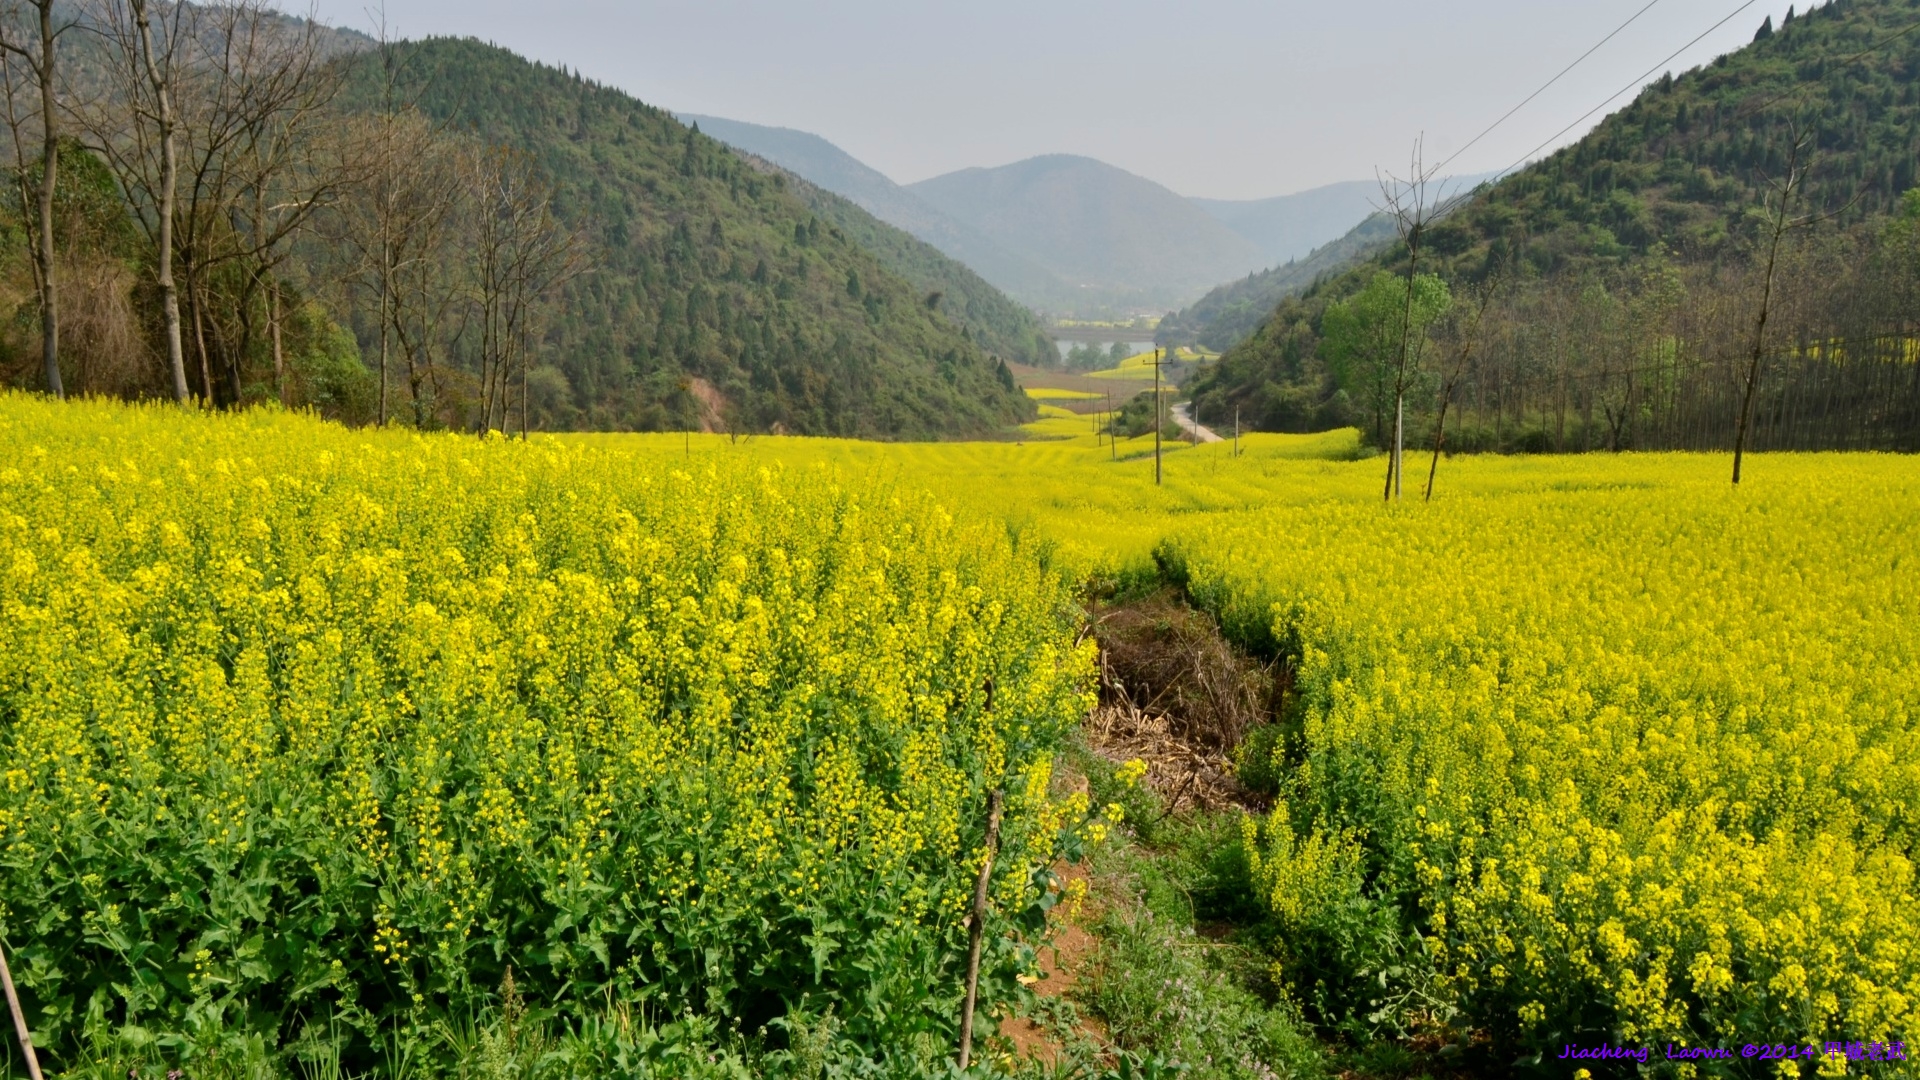 Canola flowers at Majialing, Lifeng